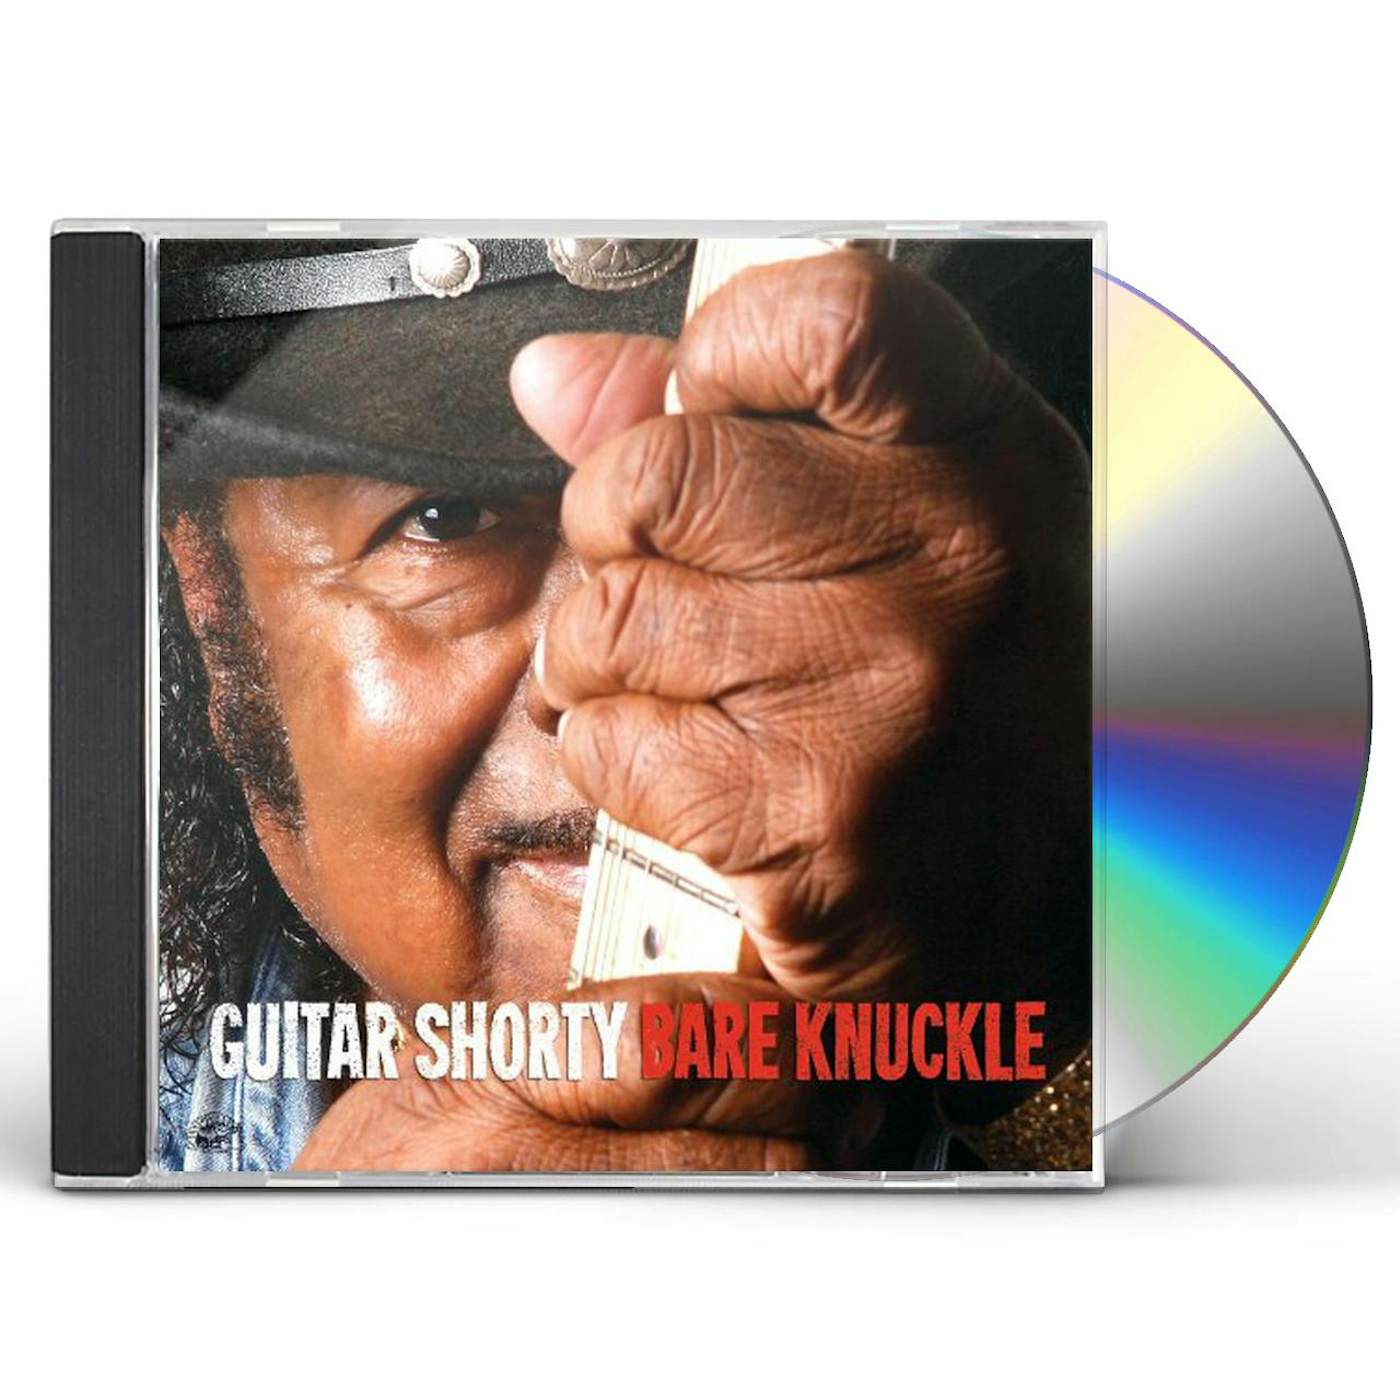 Guitar Shorty BARE KNUCKLE CD